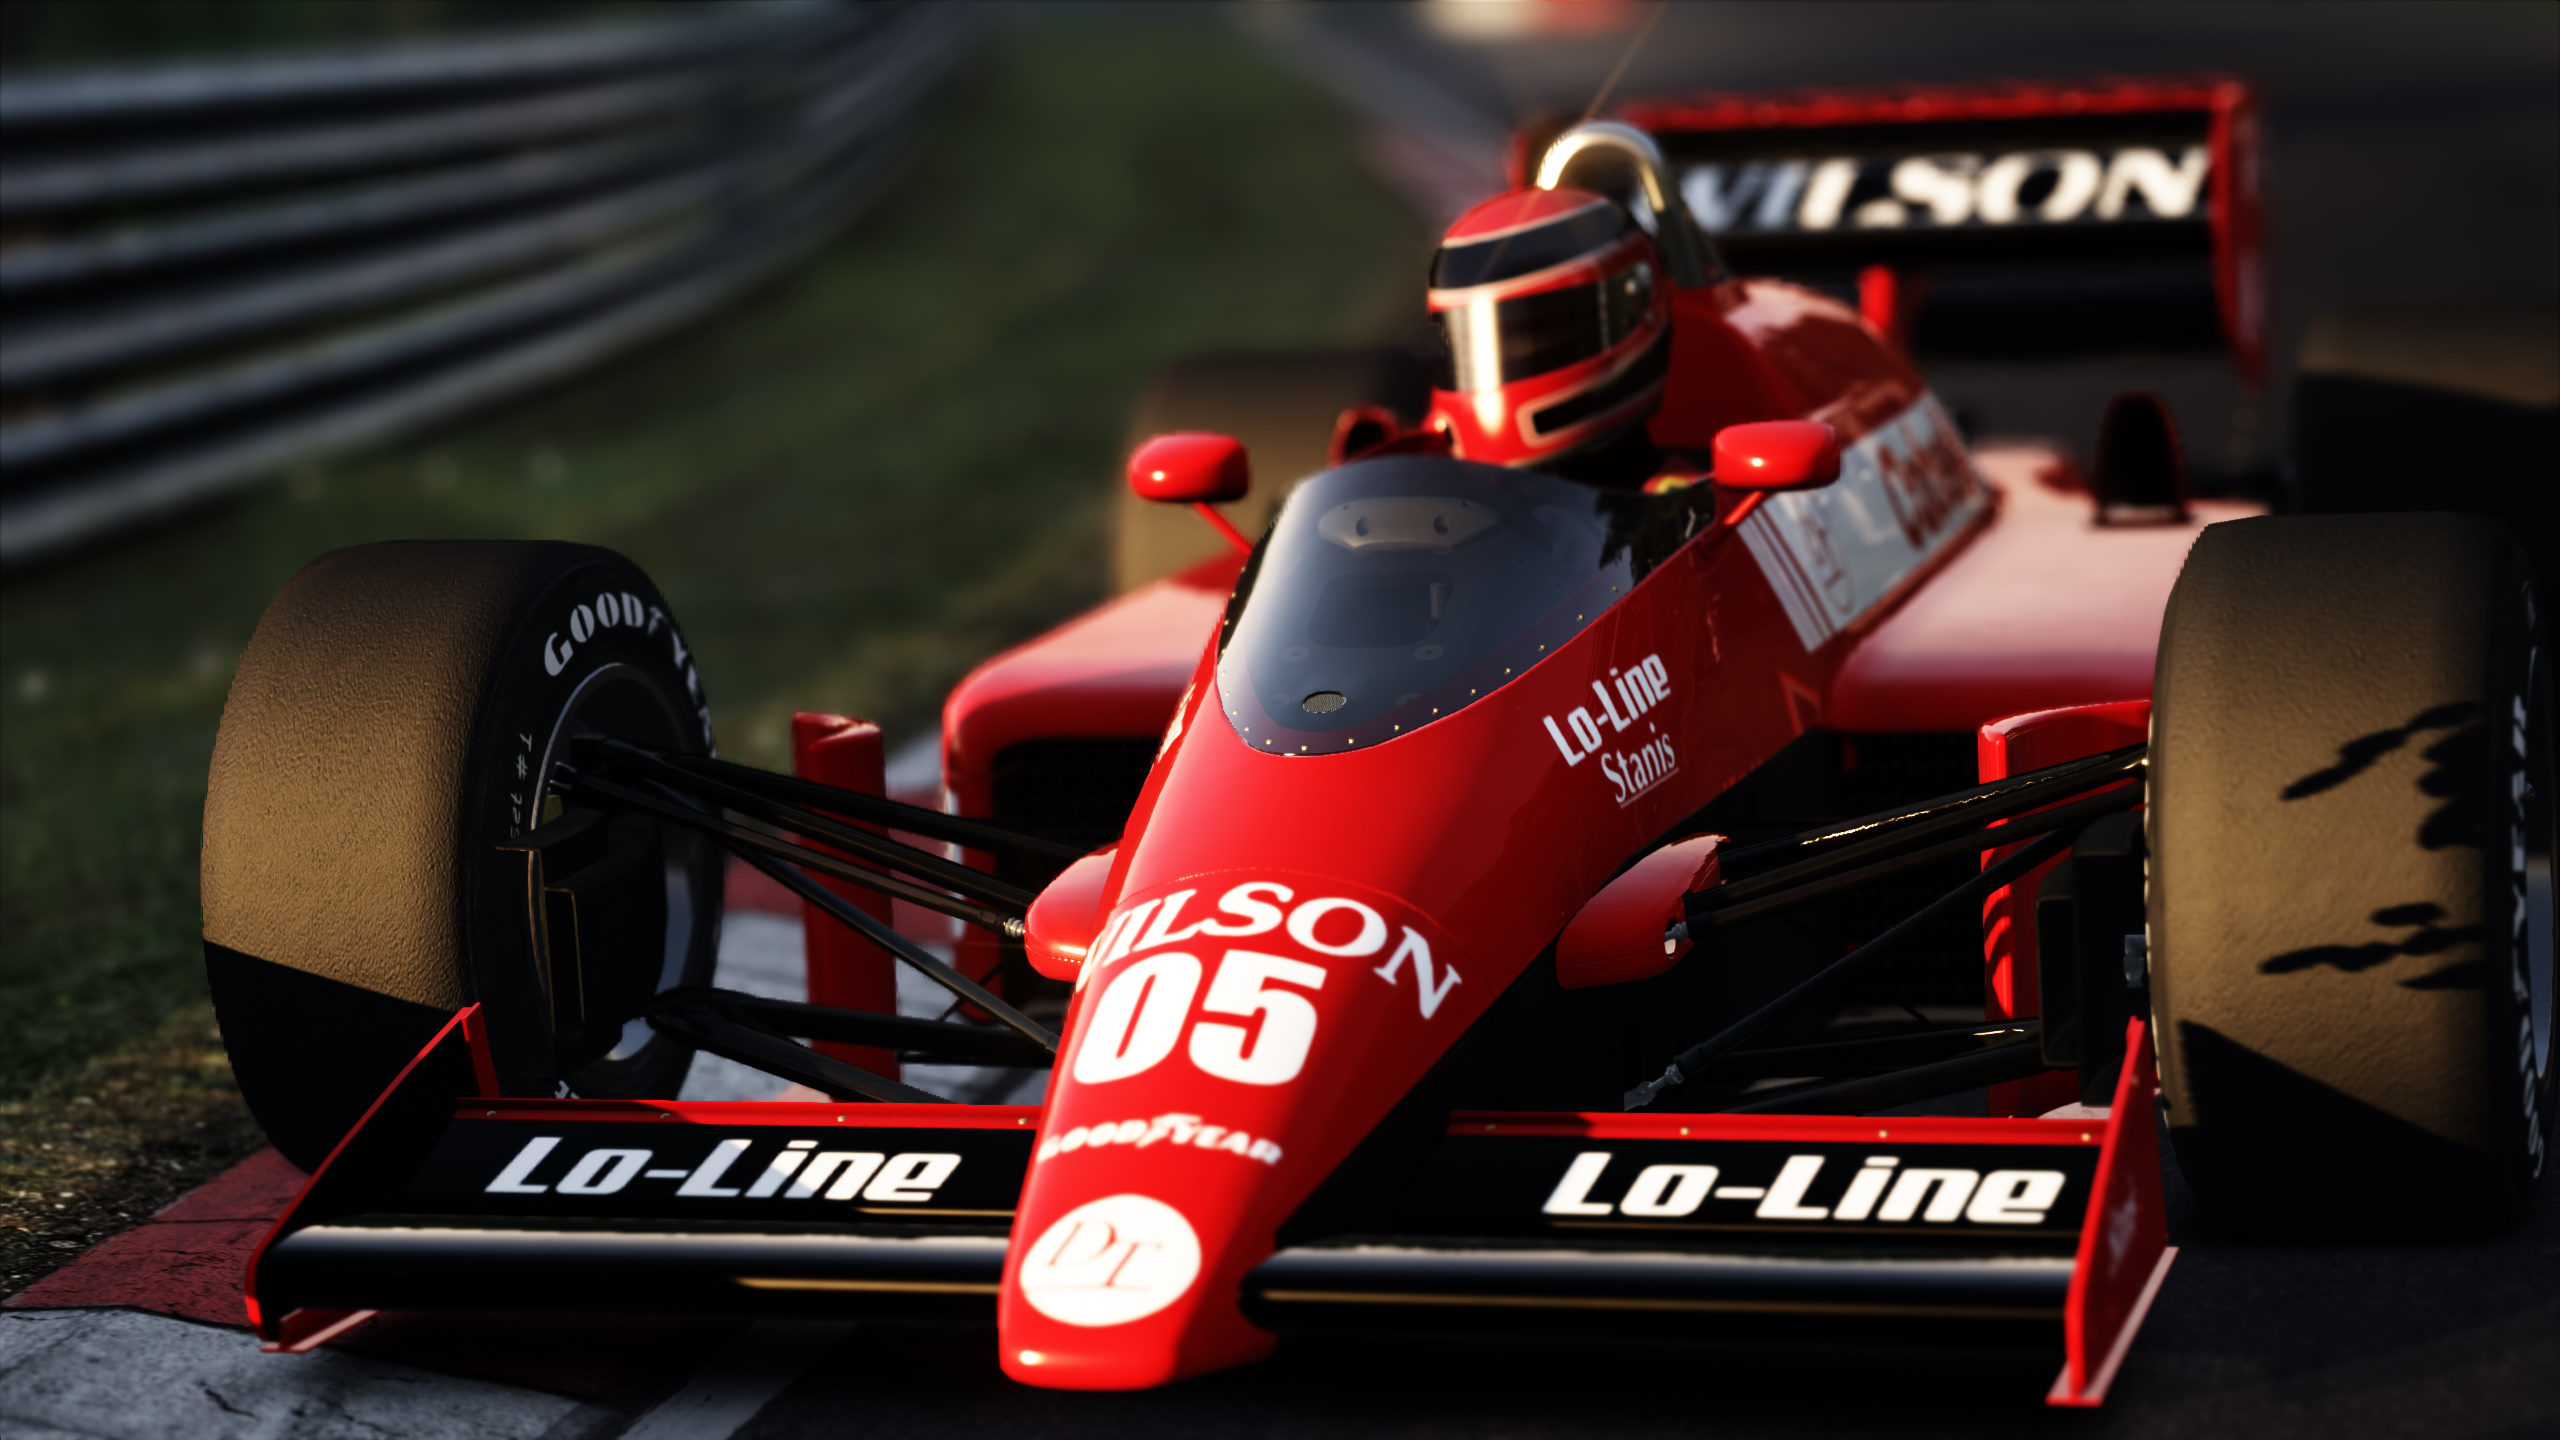 Video Game Assetto Corsa HD Wallpaper | Background Image